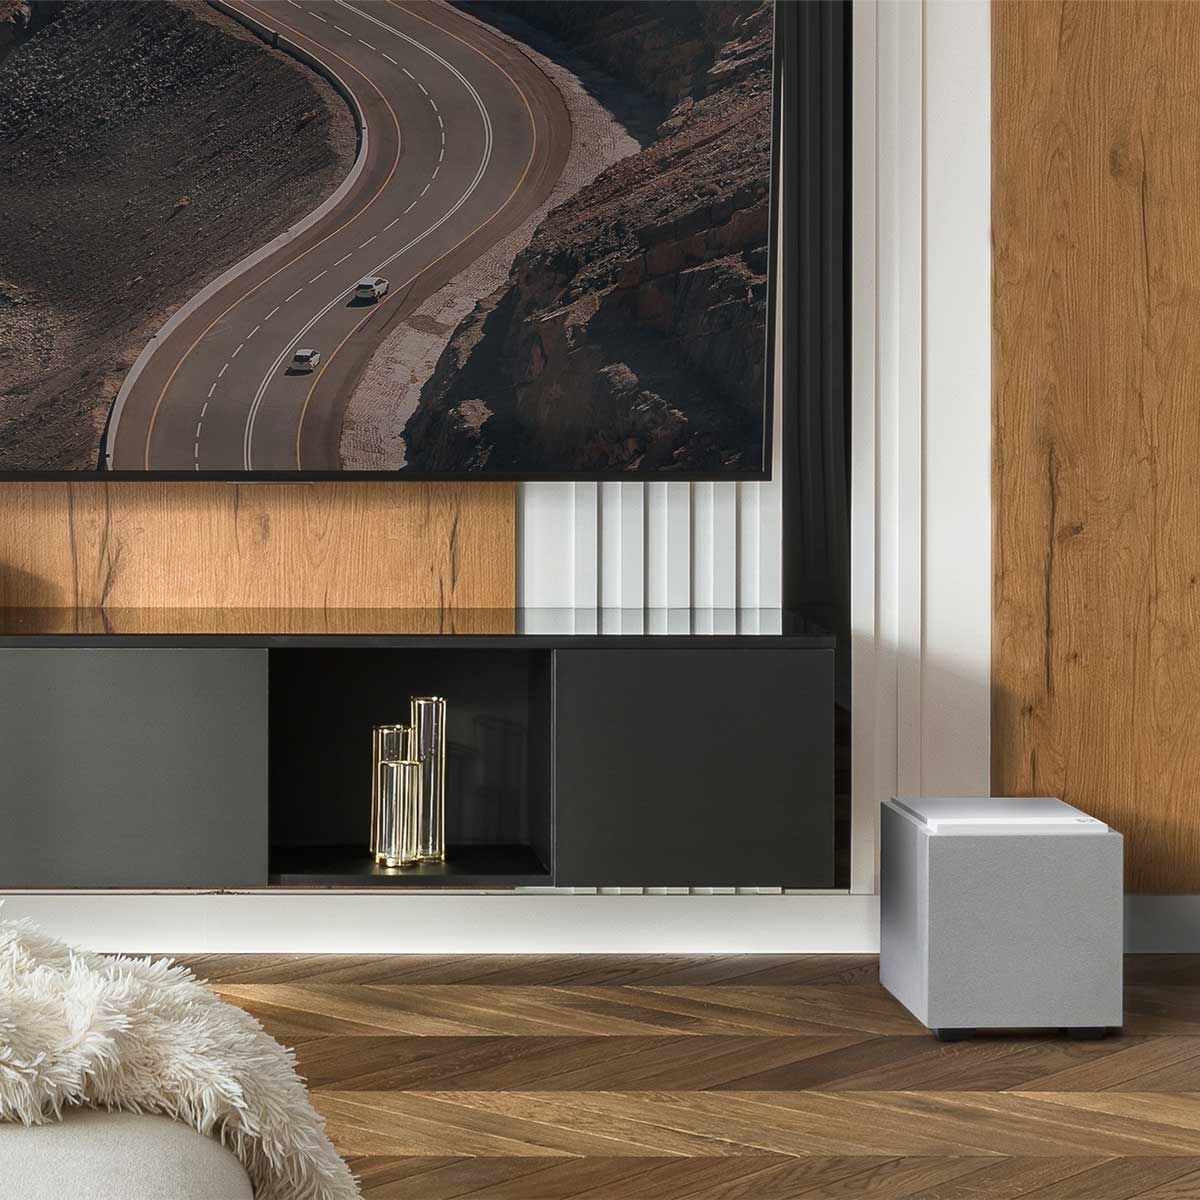 Definitive Technology Descend 8" Subwoofer, Glacier White, set up beneath a black media cabinet and a large television in a wood-paneled living space